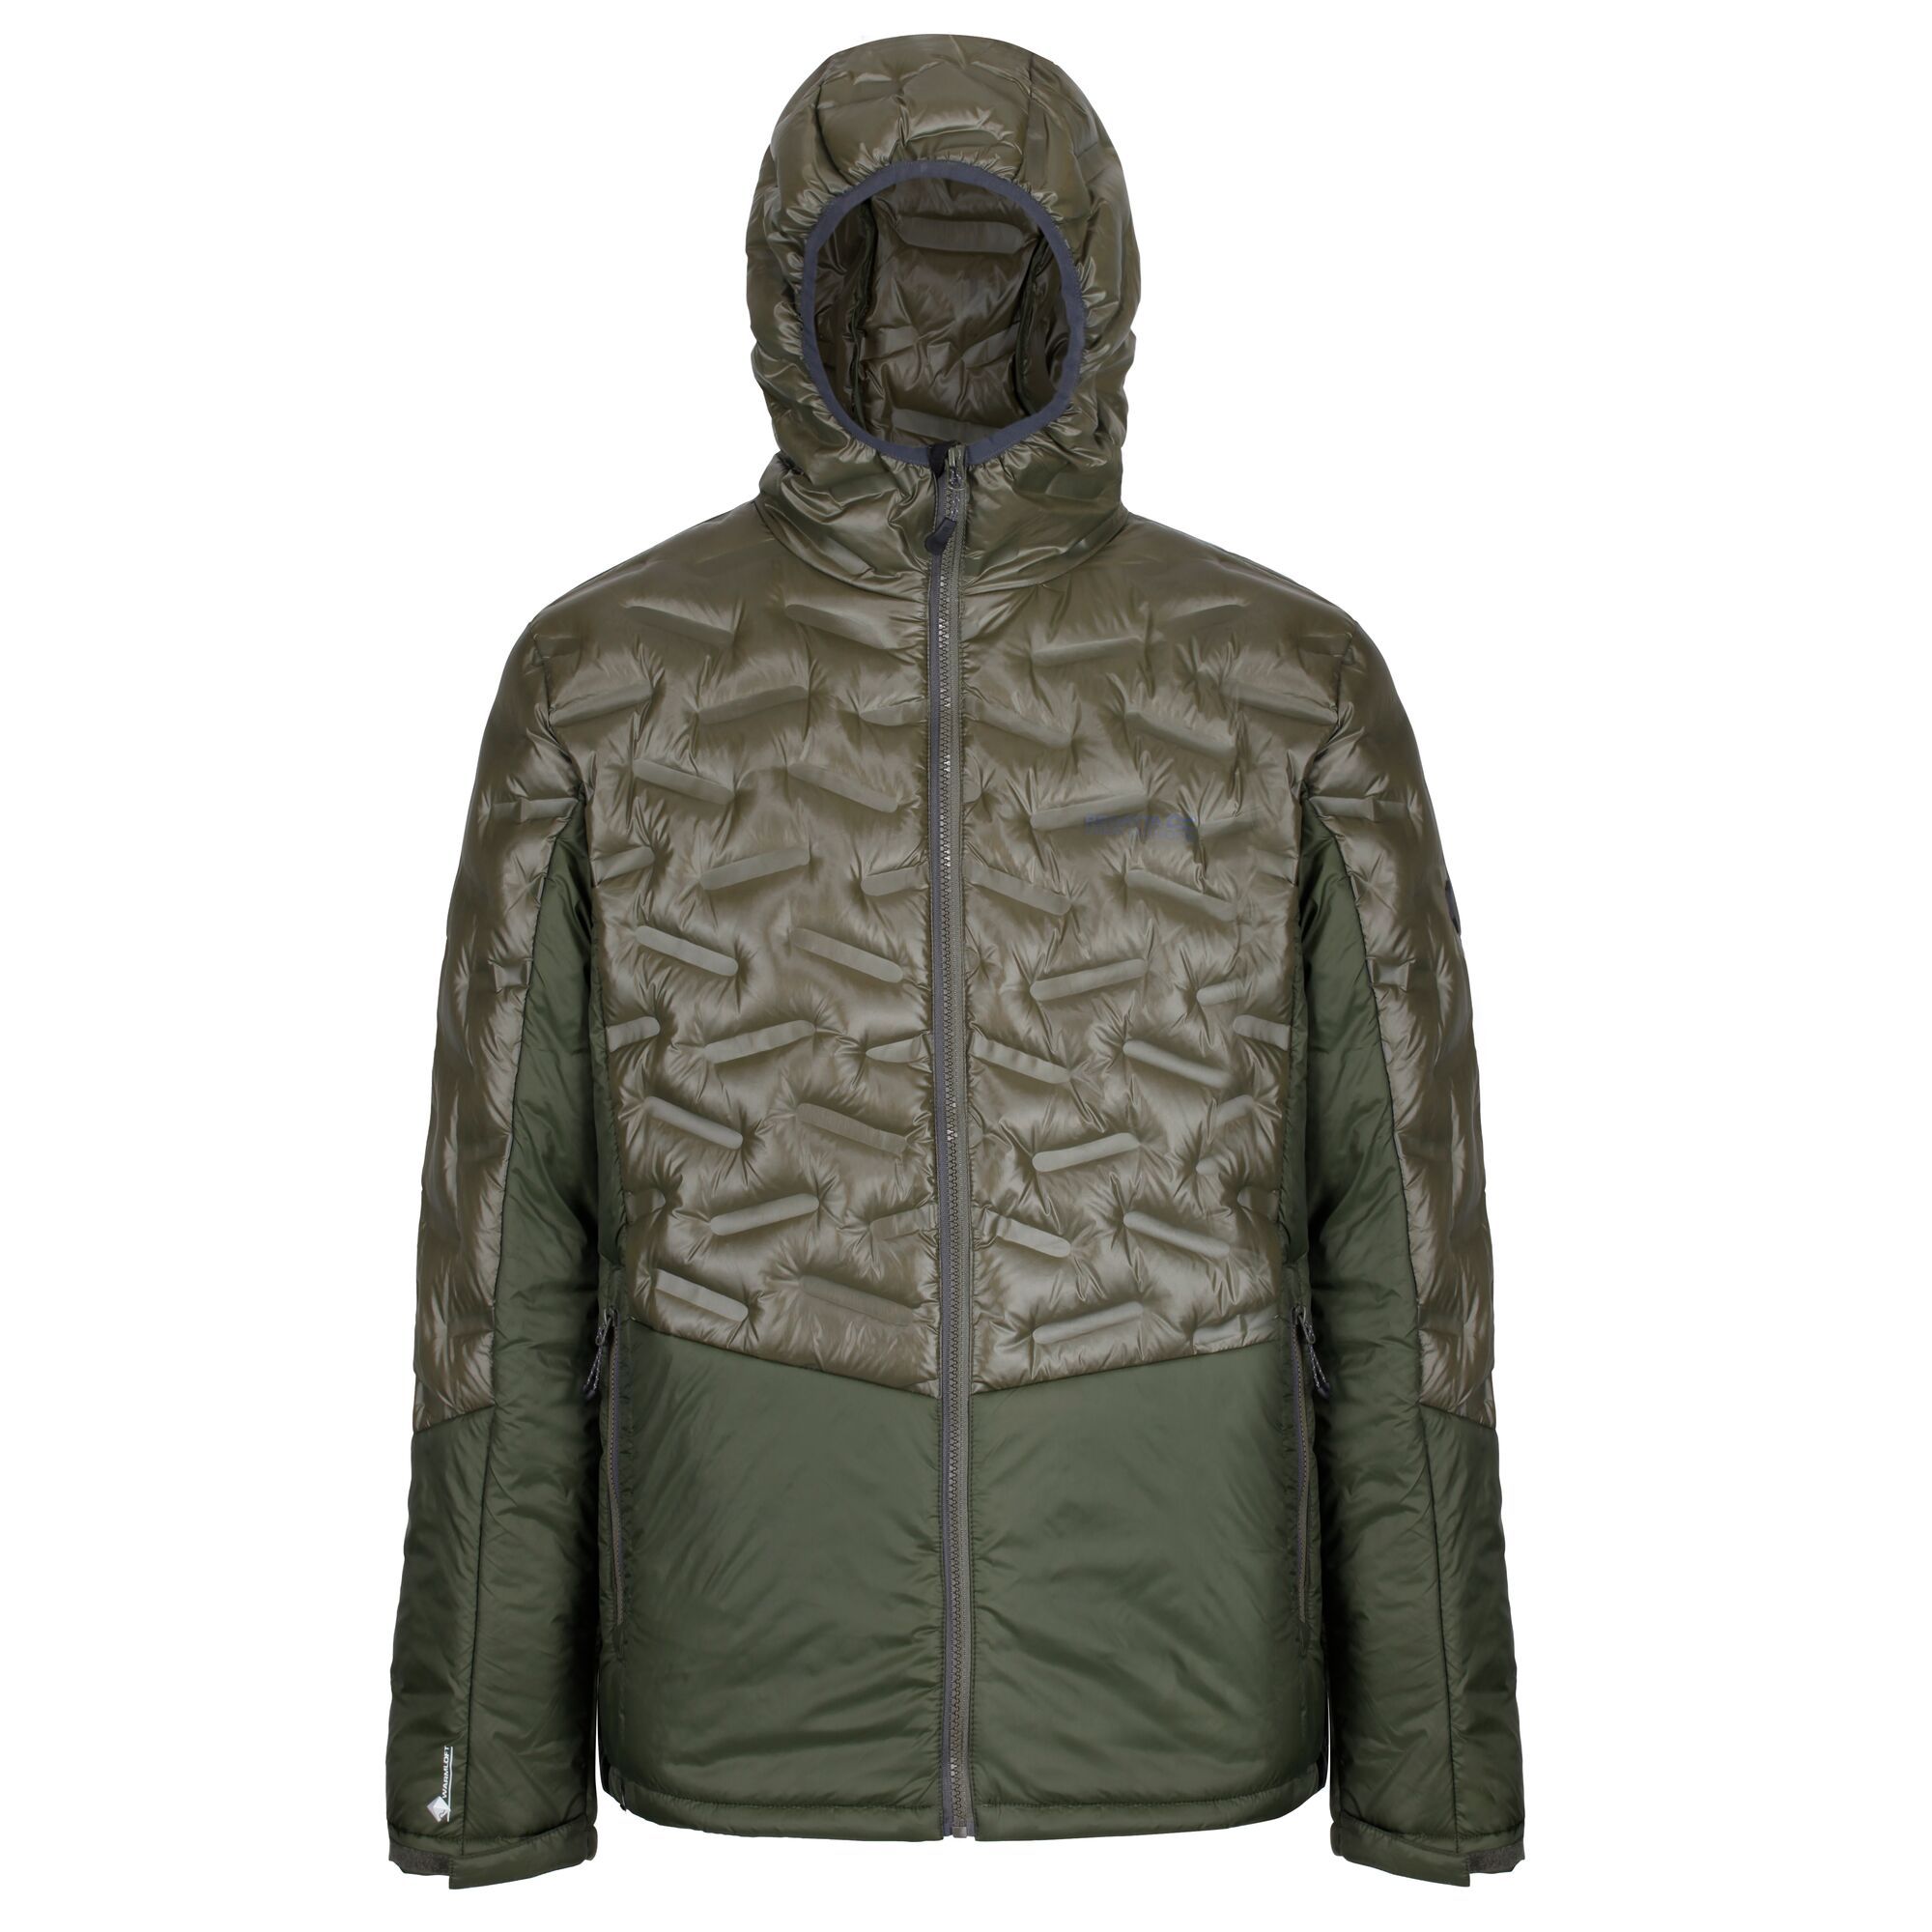 100% Polyamide. Lightweight down fill insulation. Warmloft soft-touch insulation. DWR water resistant finish. Attached hood with stretch binding. 2 zipped pockets.